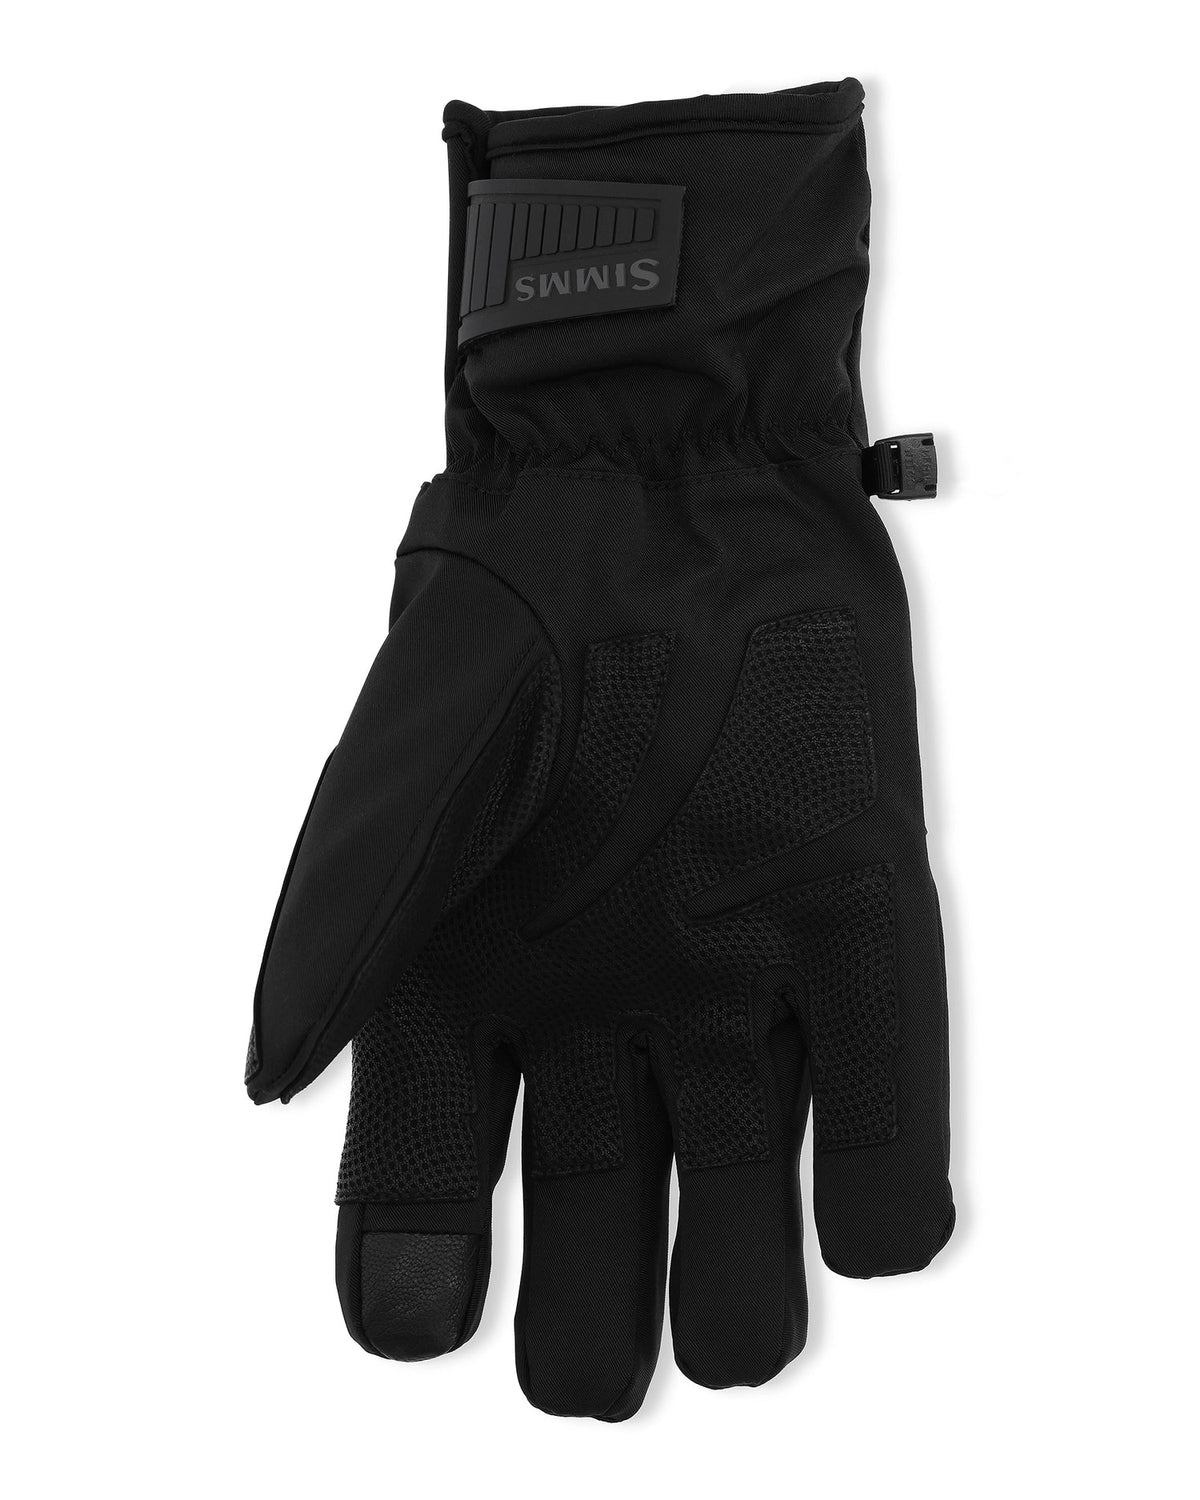 Simms Pro Dry Gore-Tex Glove + Liner